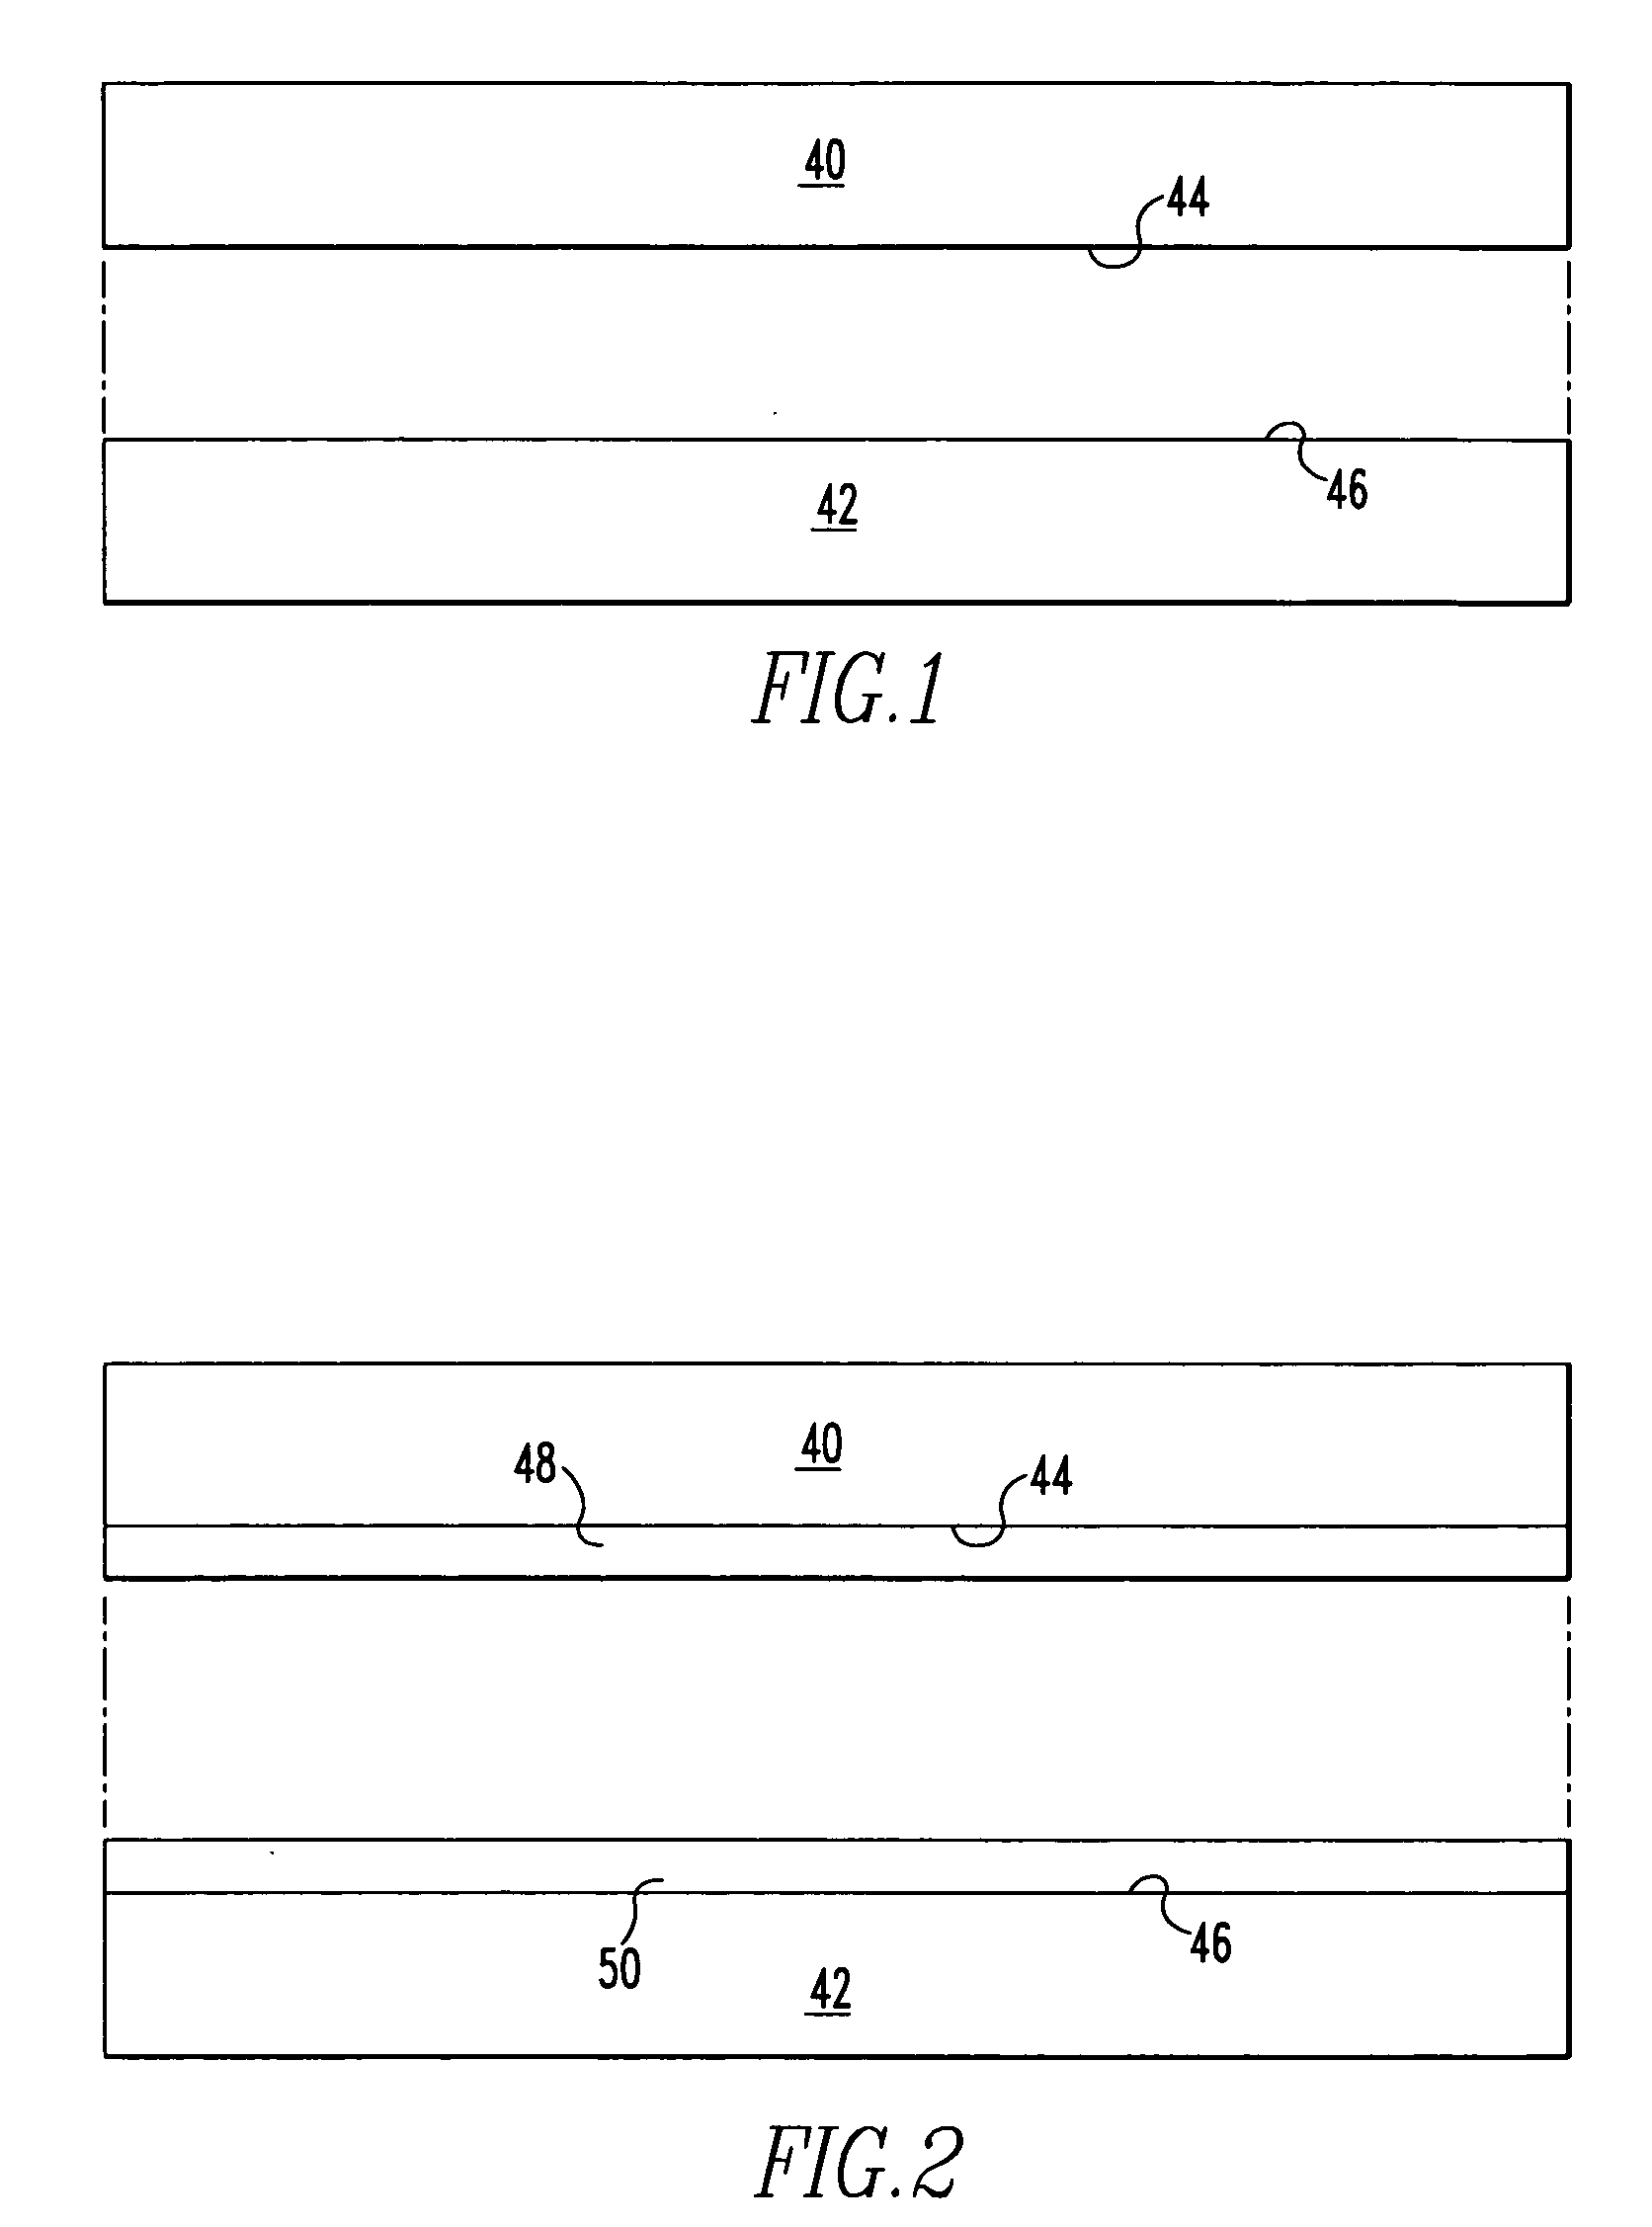 Method of diffusion bonding of nickel based superalloy substrates